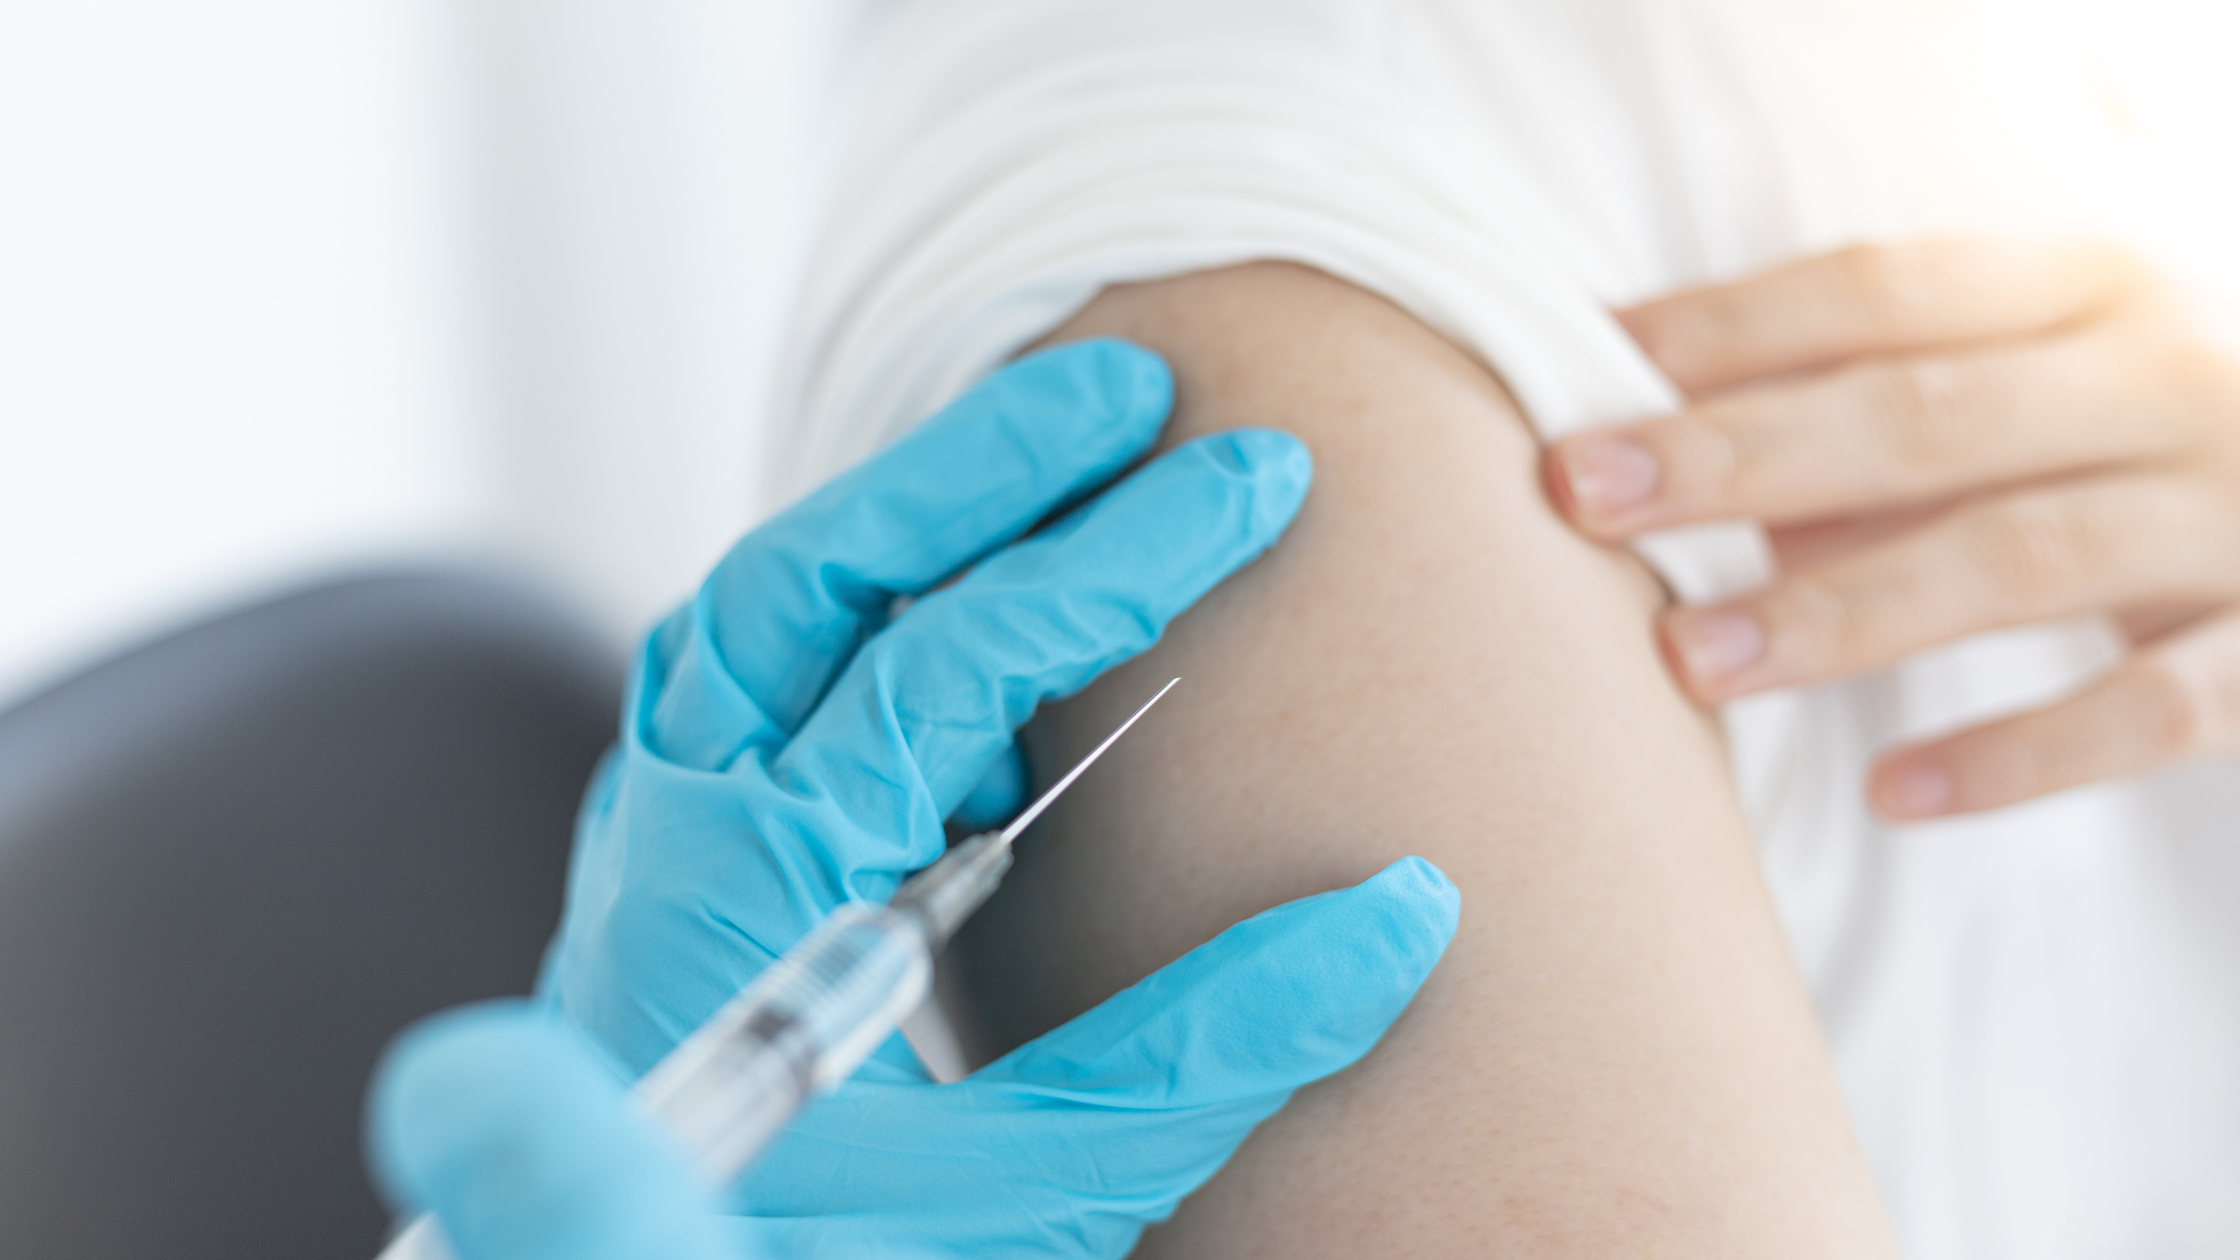 Person receiving a vaccine stock photo